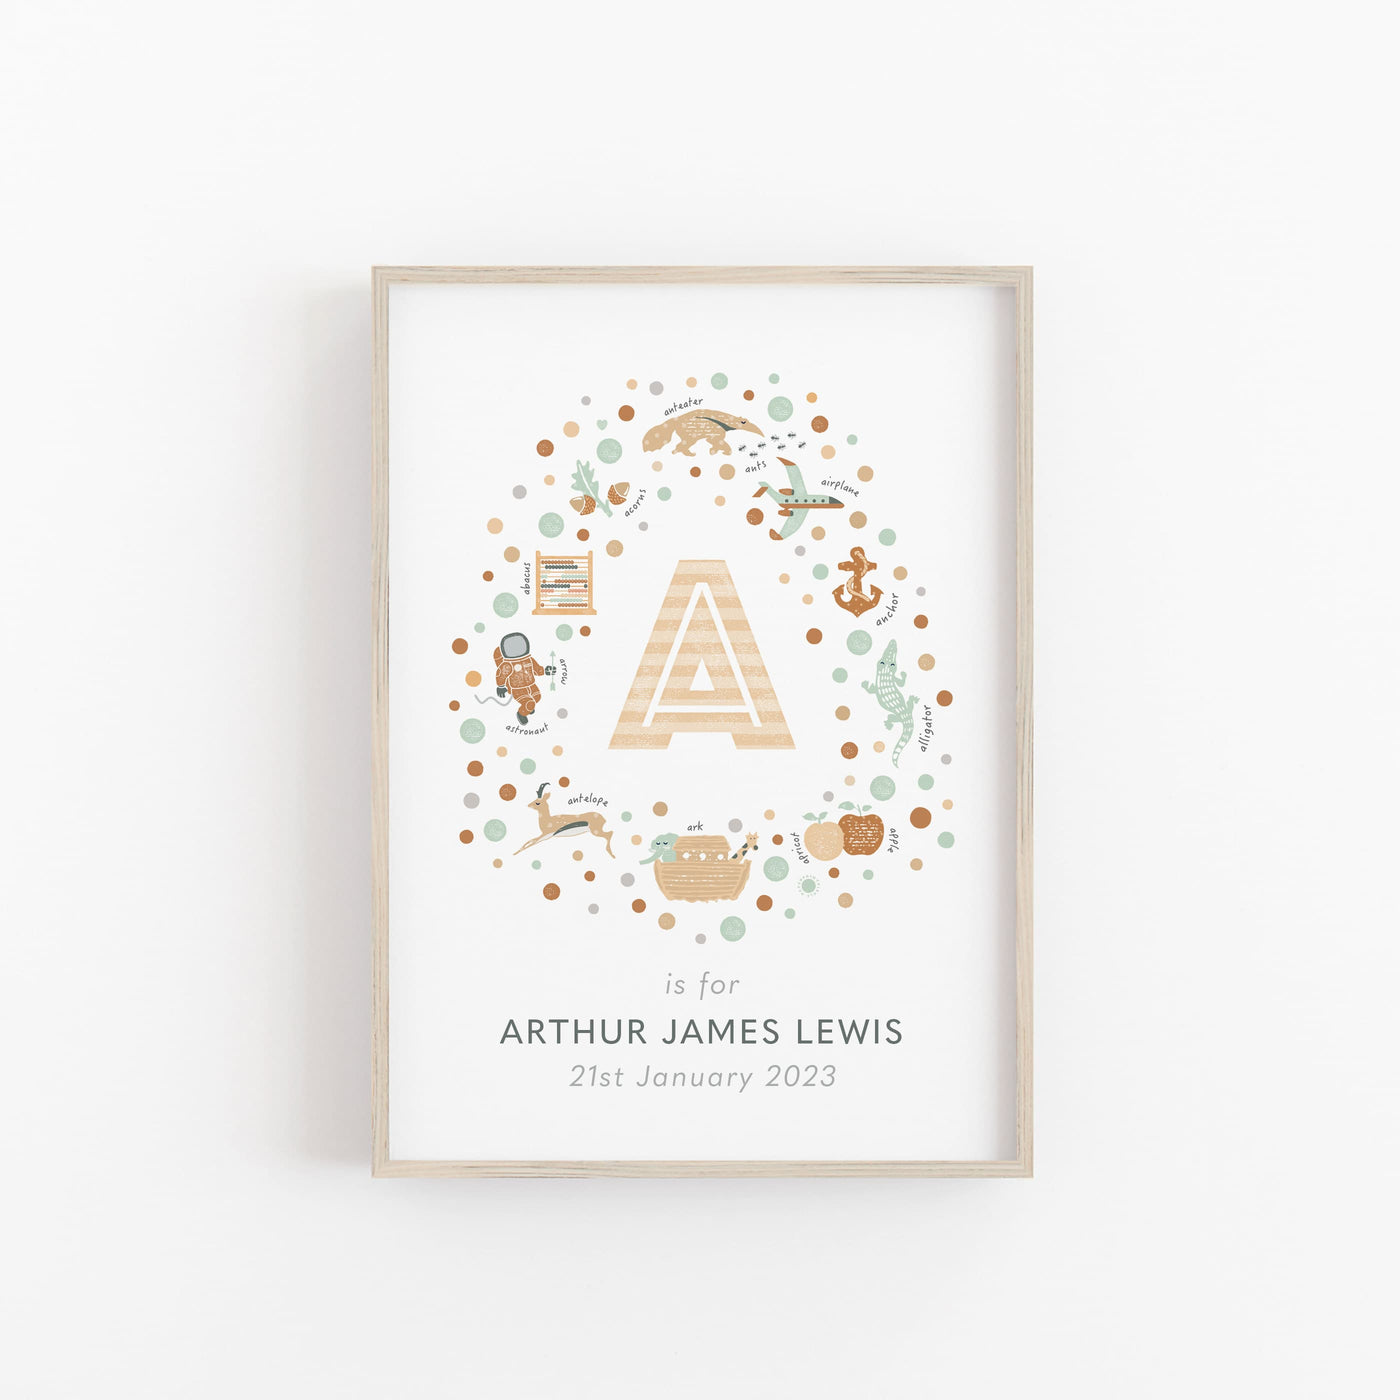 Personalised Children's Initial Letter A Name Art Print